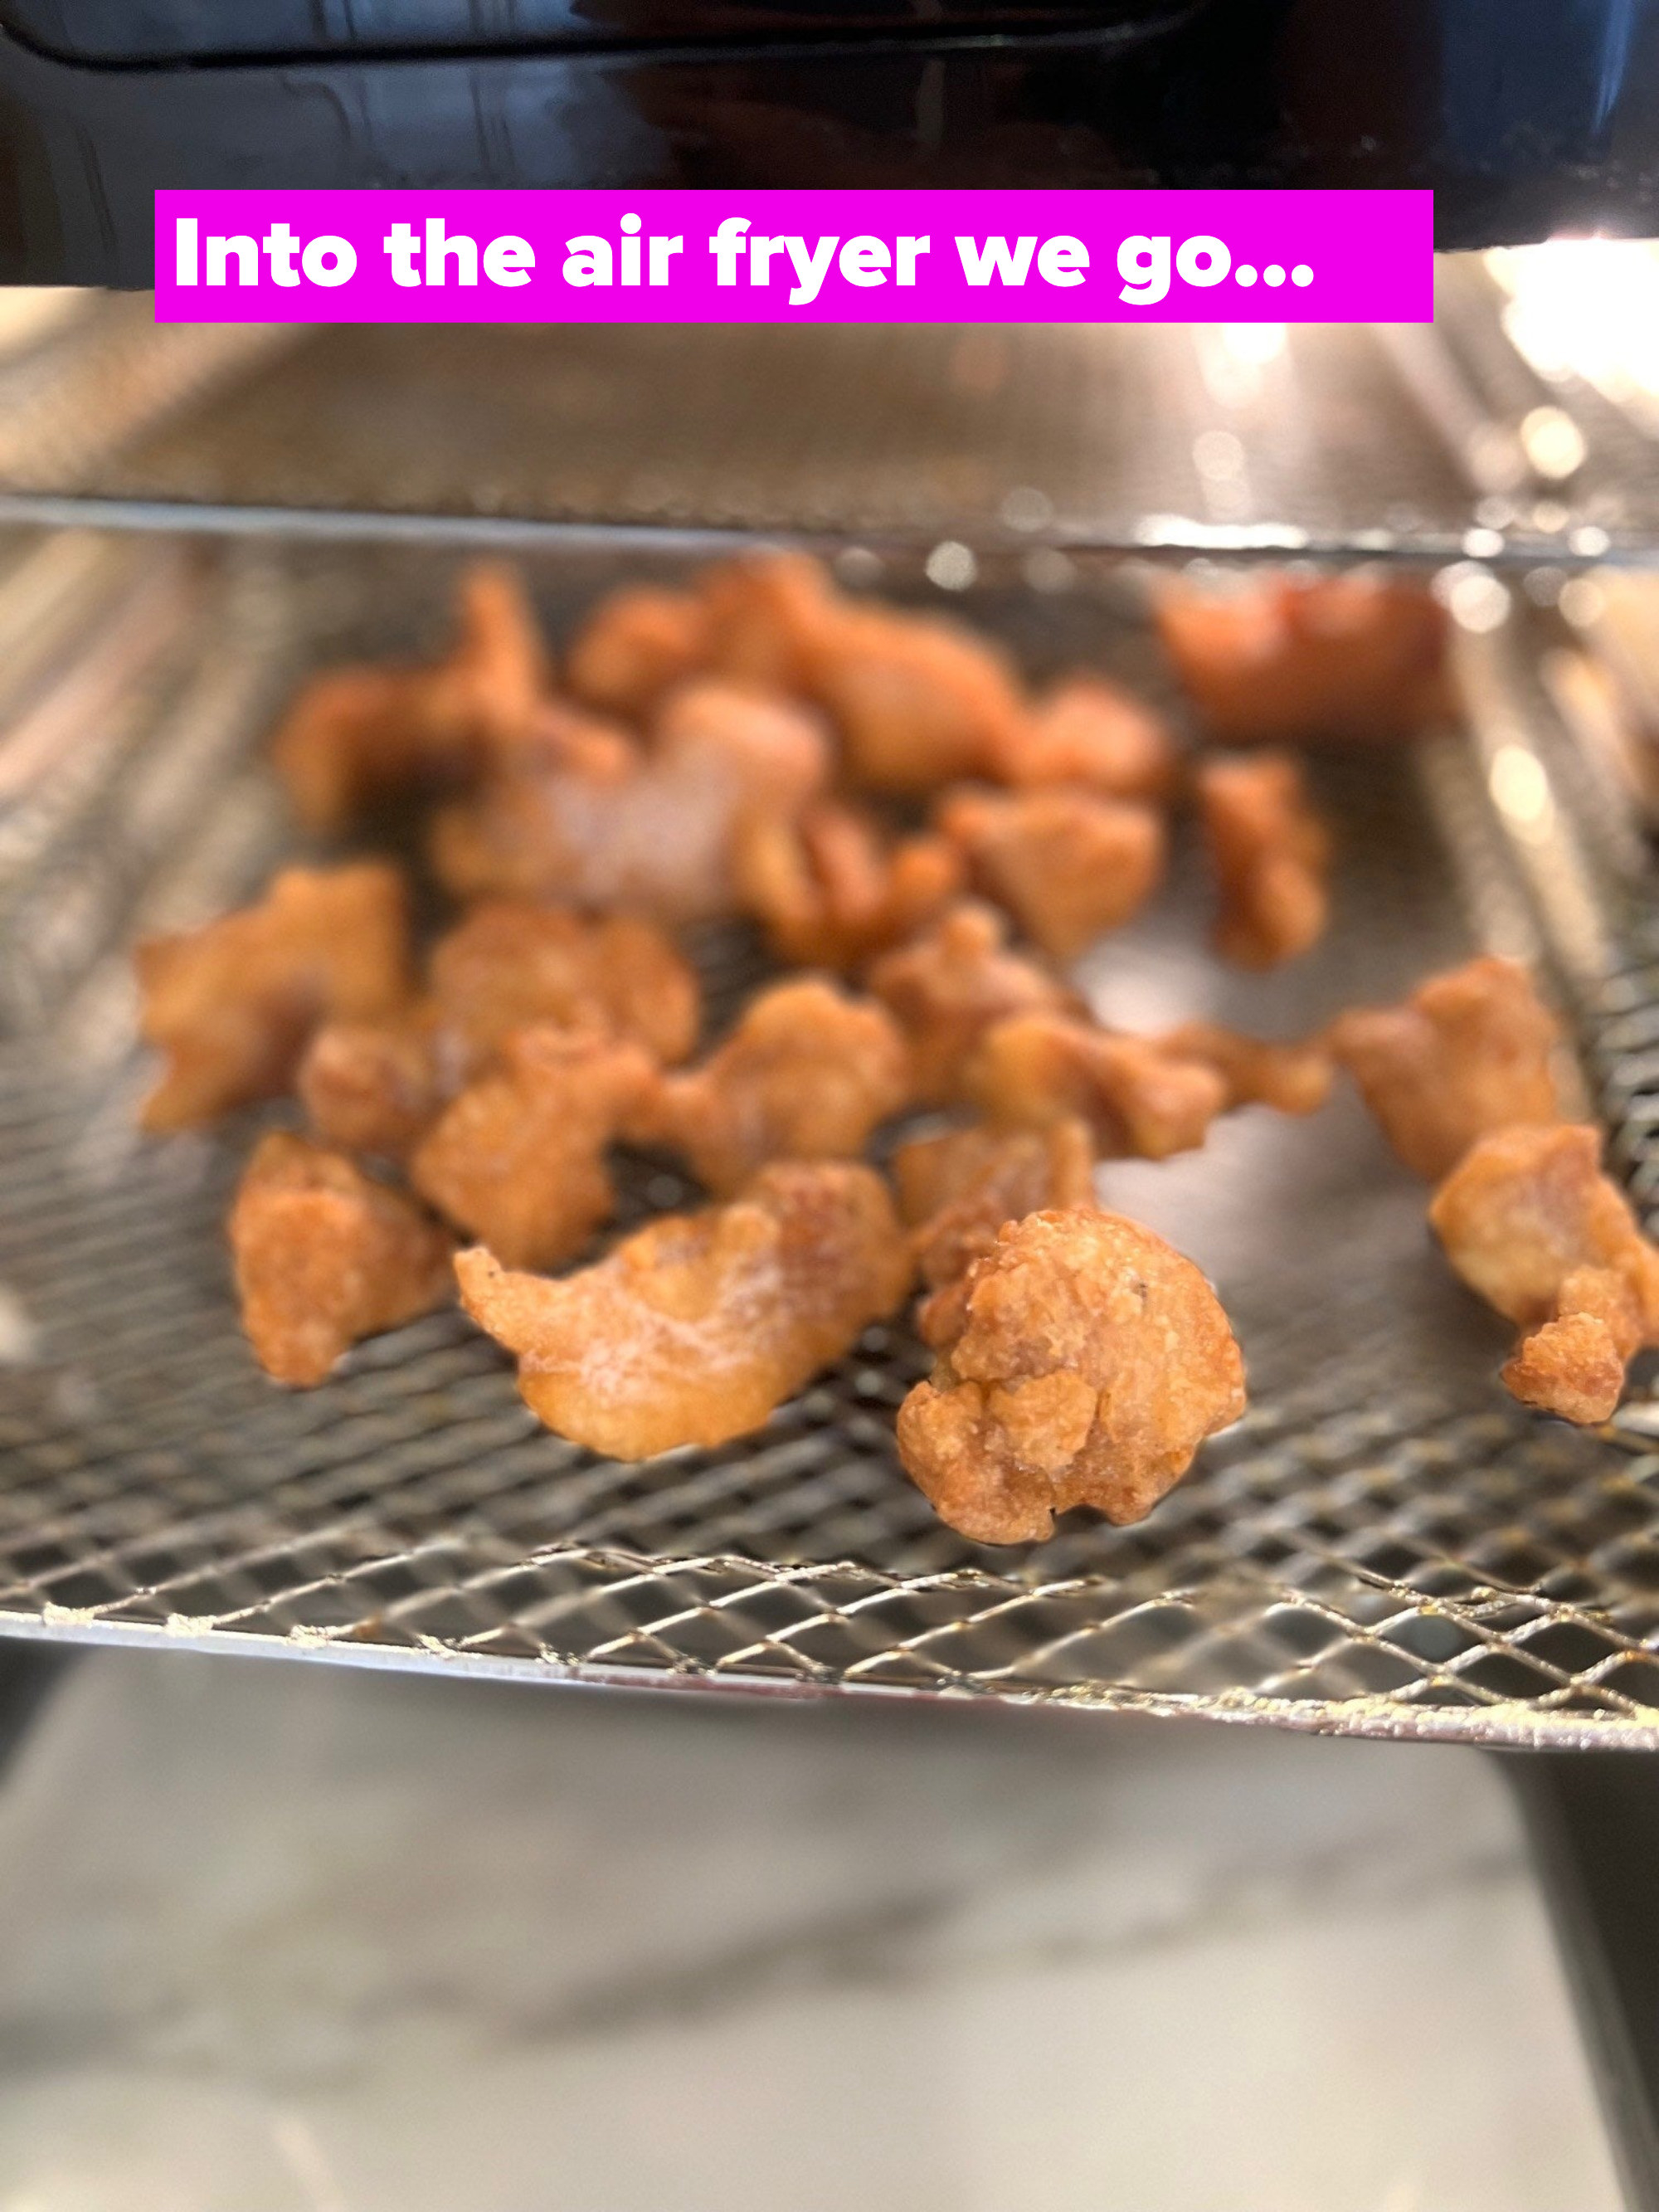 Pieces of breaded chicken in an air fryer.